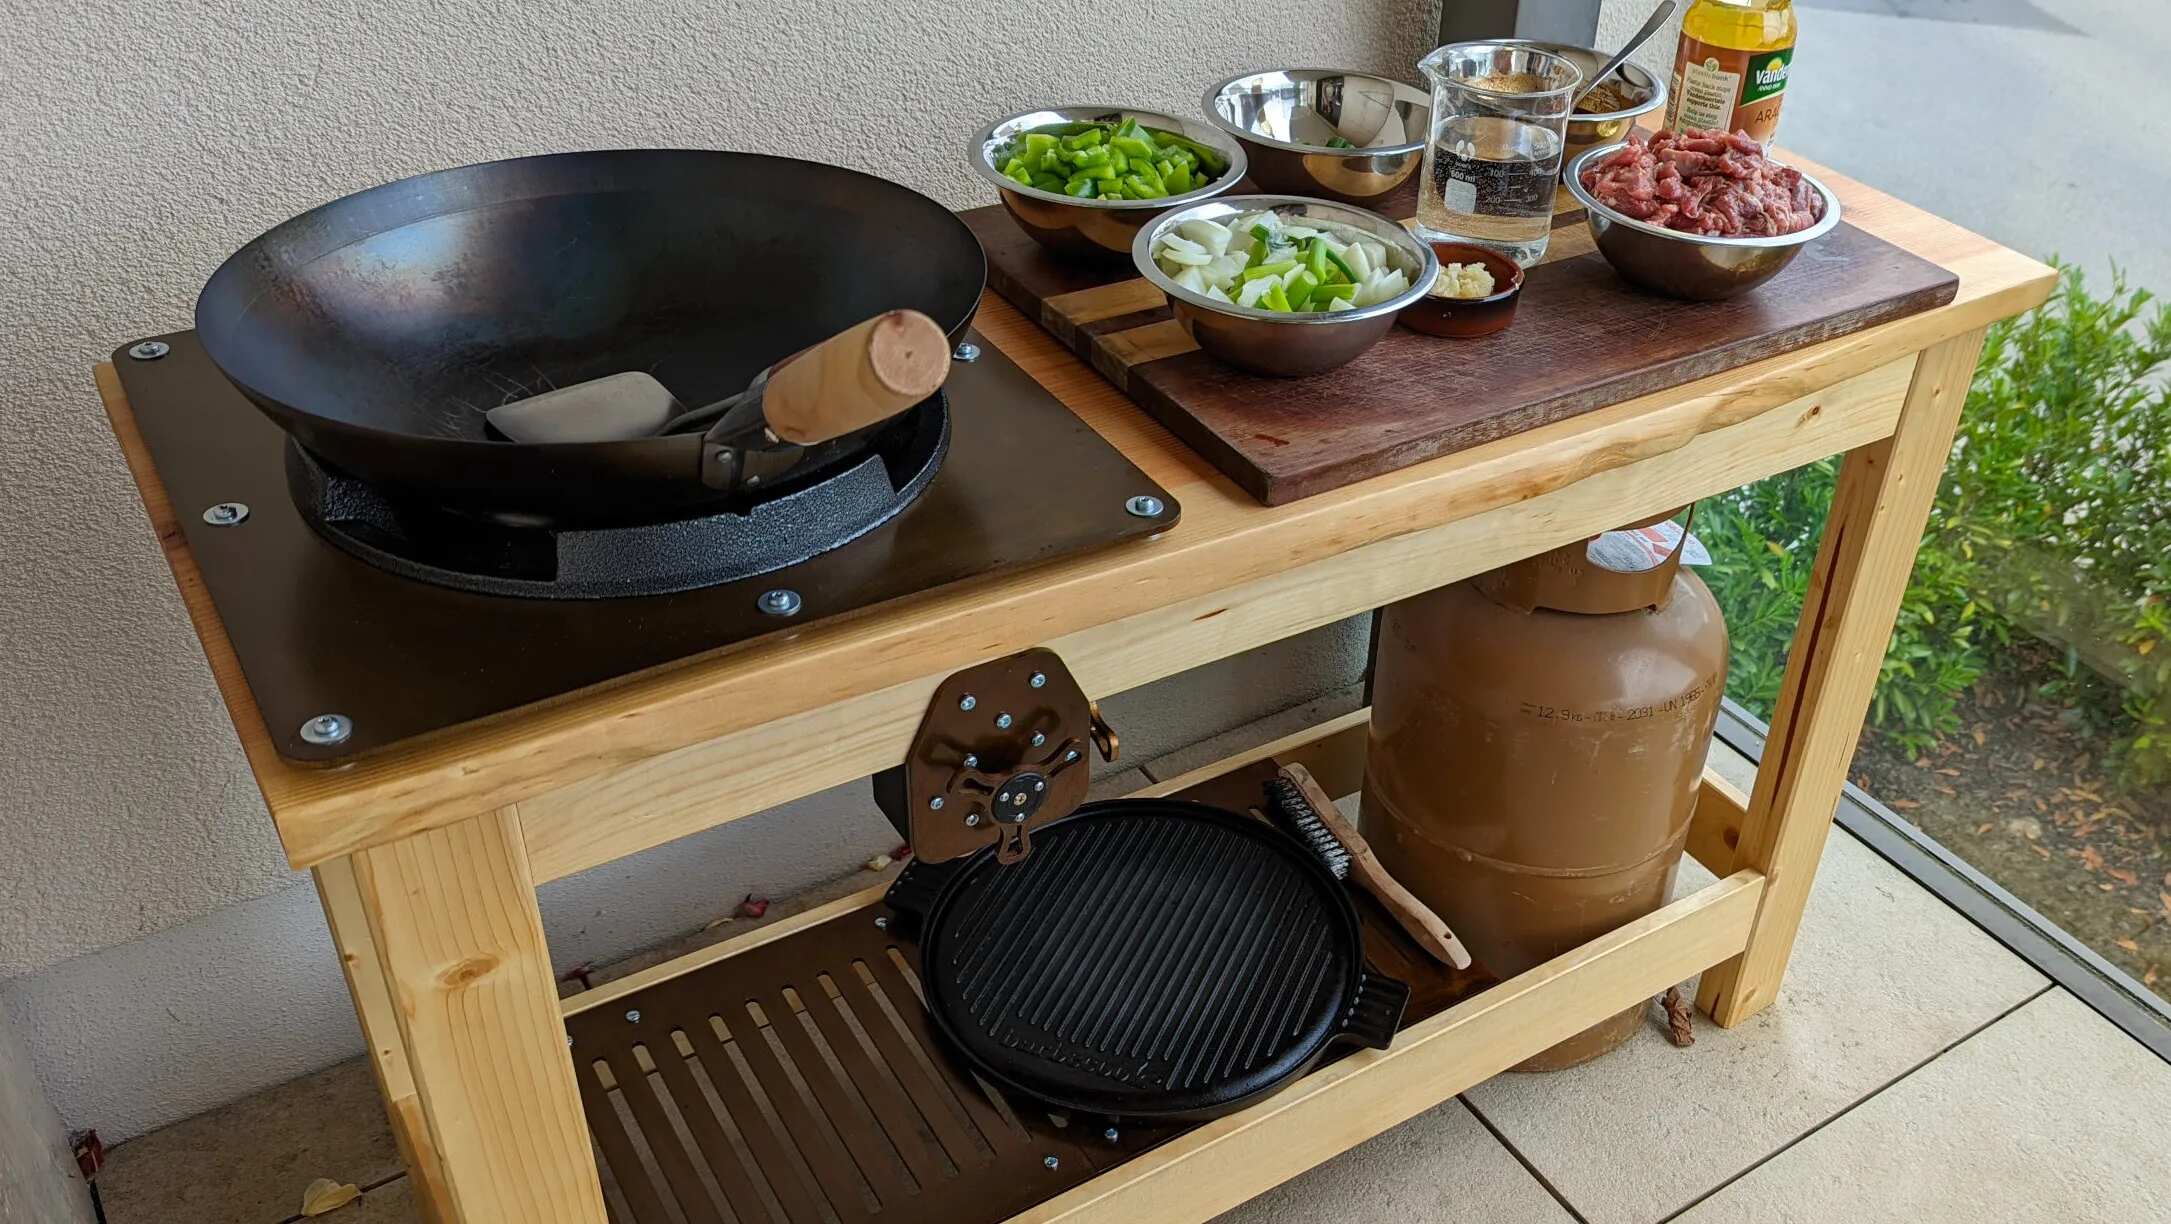 https://recipes.net/wp-content/uploads/2023/09/how-to-set-up-a-wok-cooking-station-1694942092.jpg